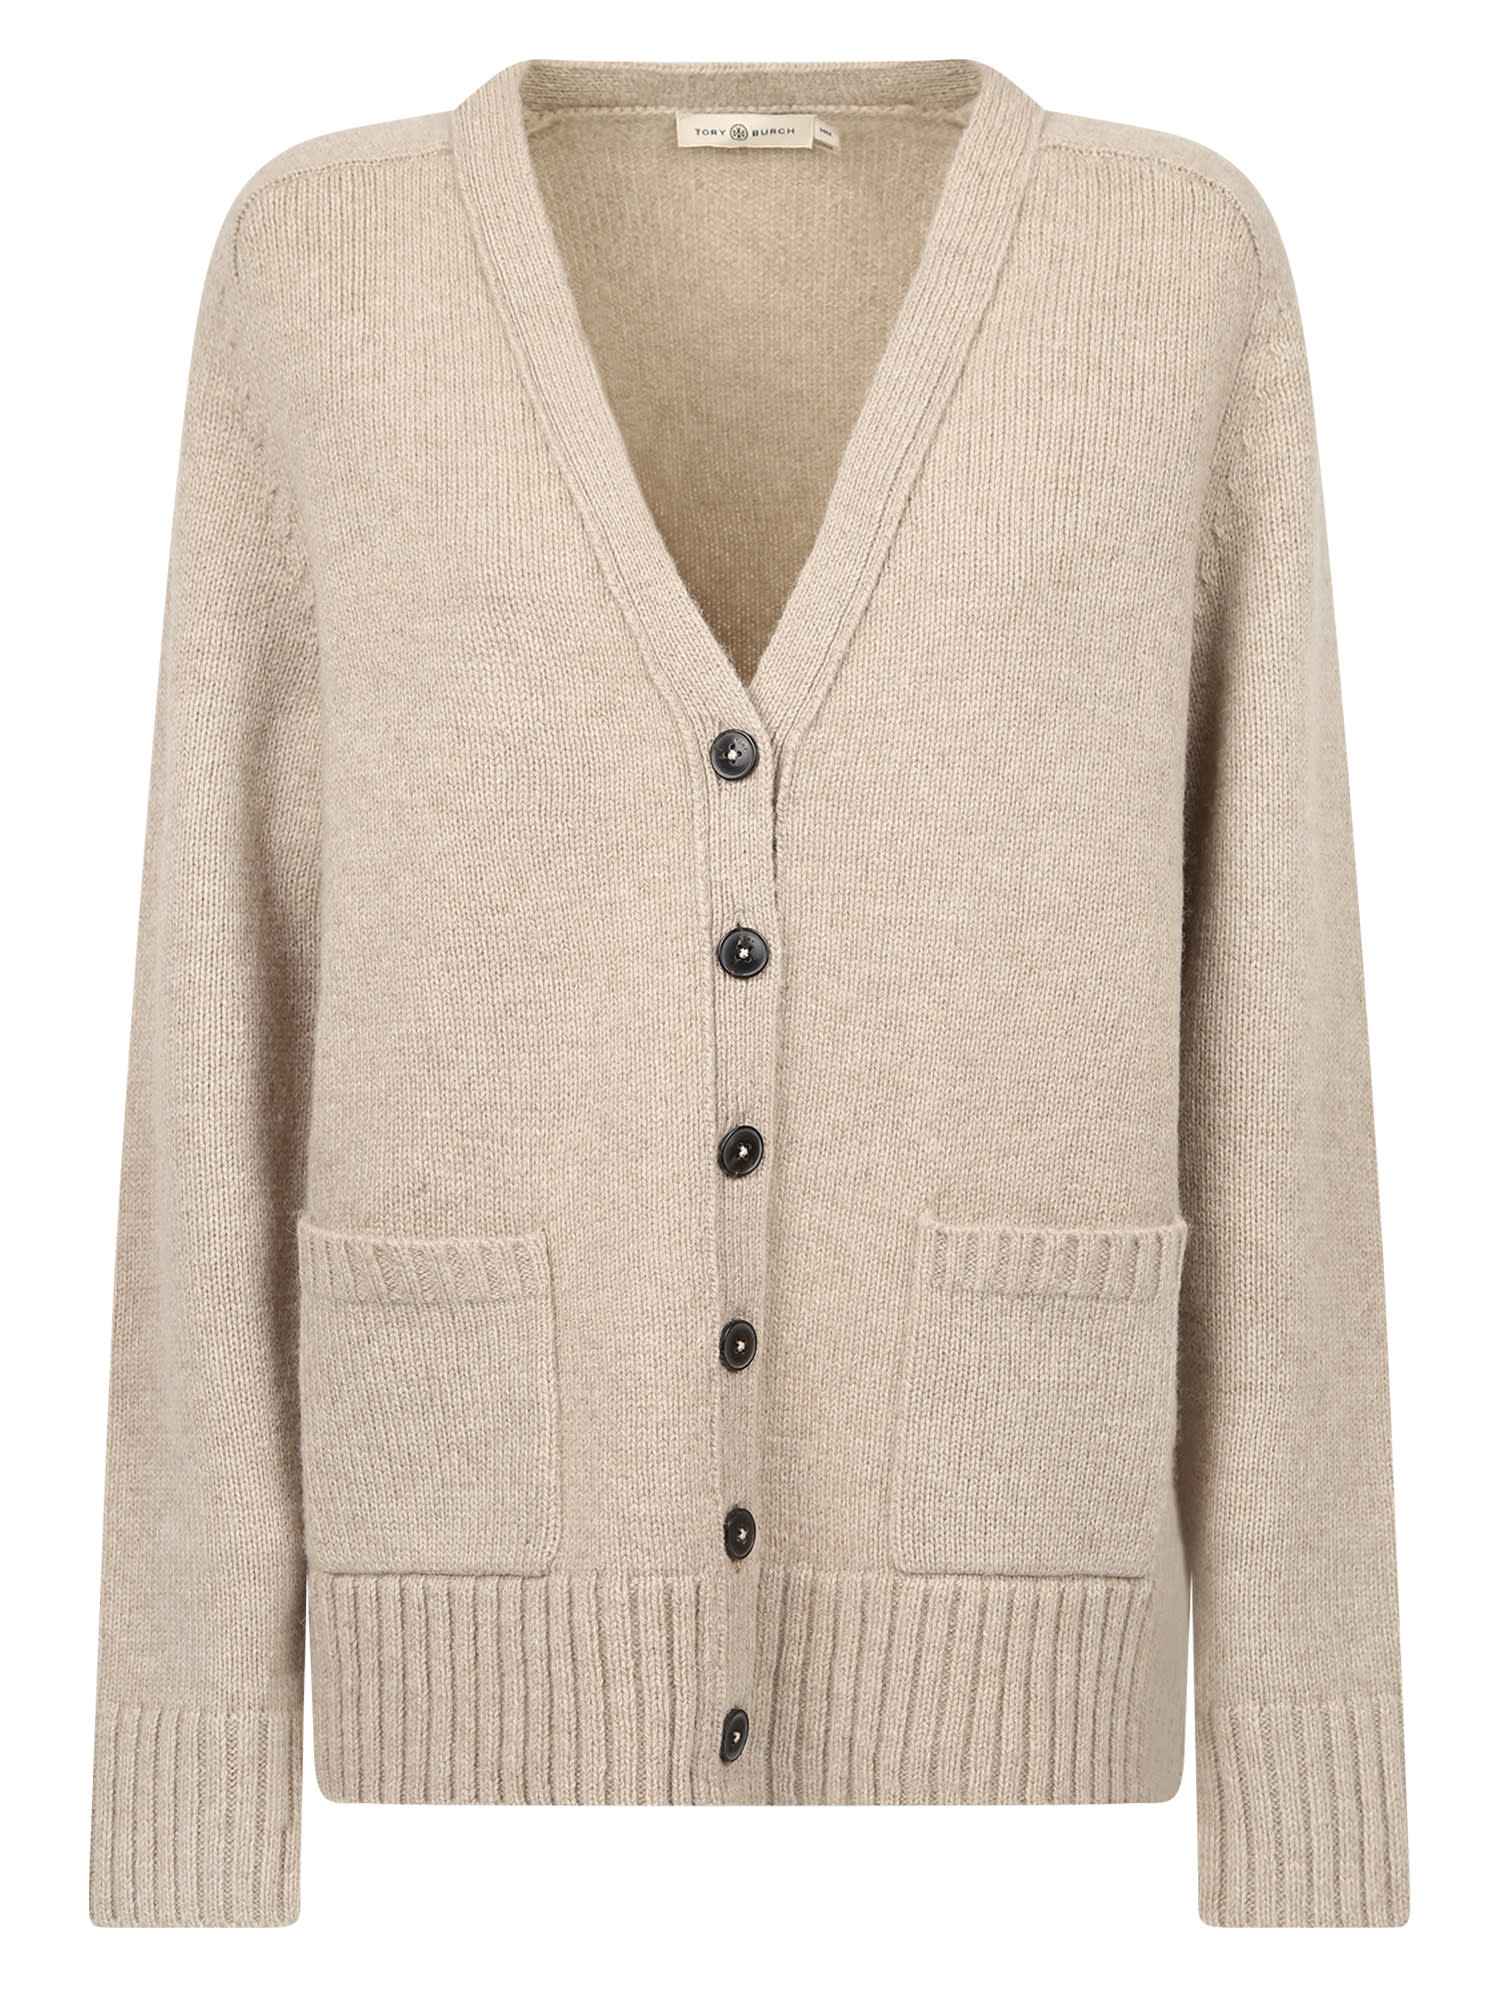 Tory Burch Relaxed Fit Cardigan